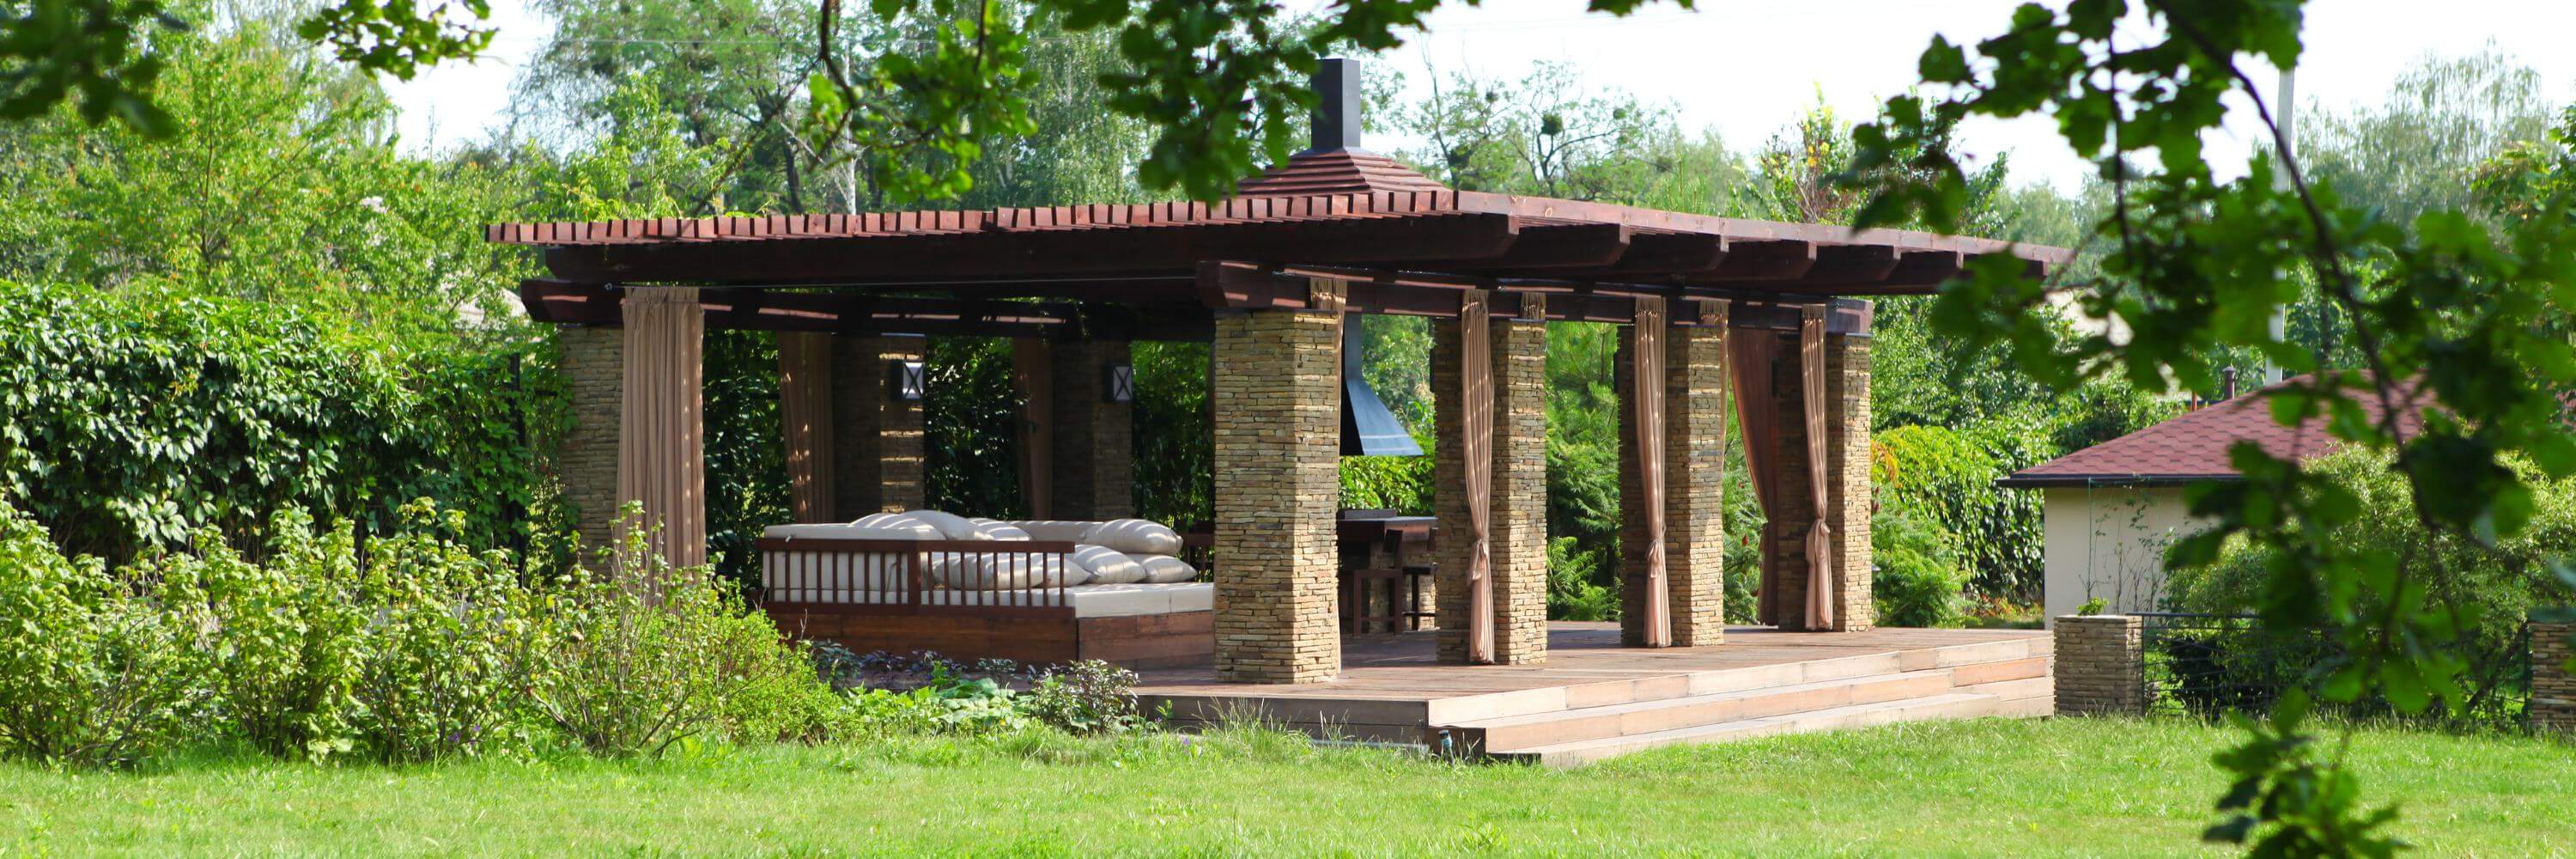 Covered patio in the garden